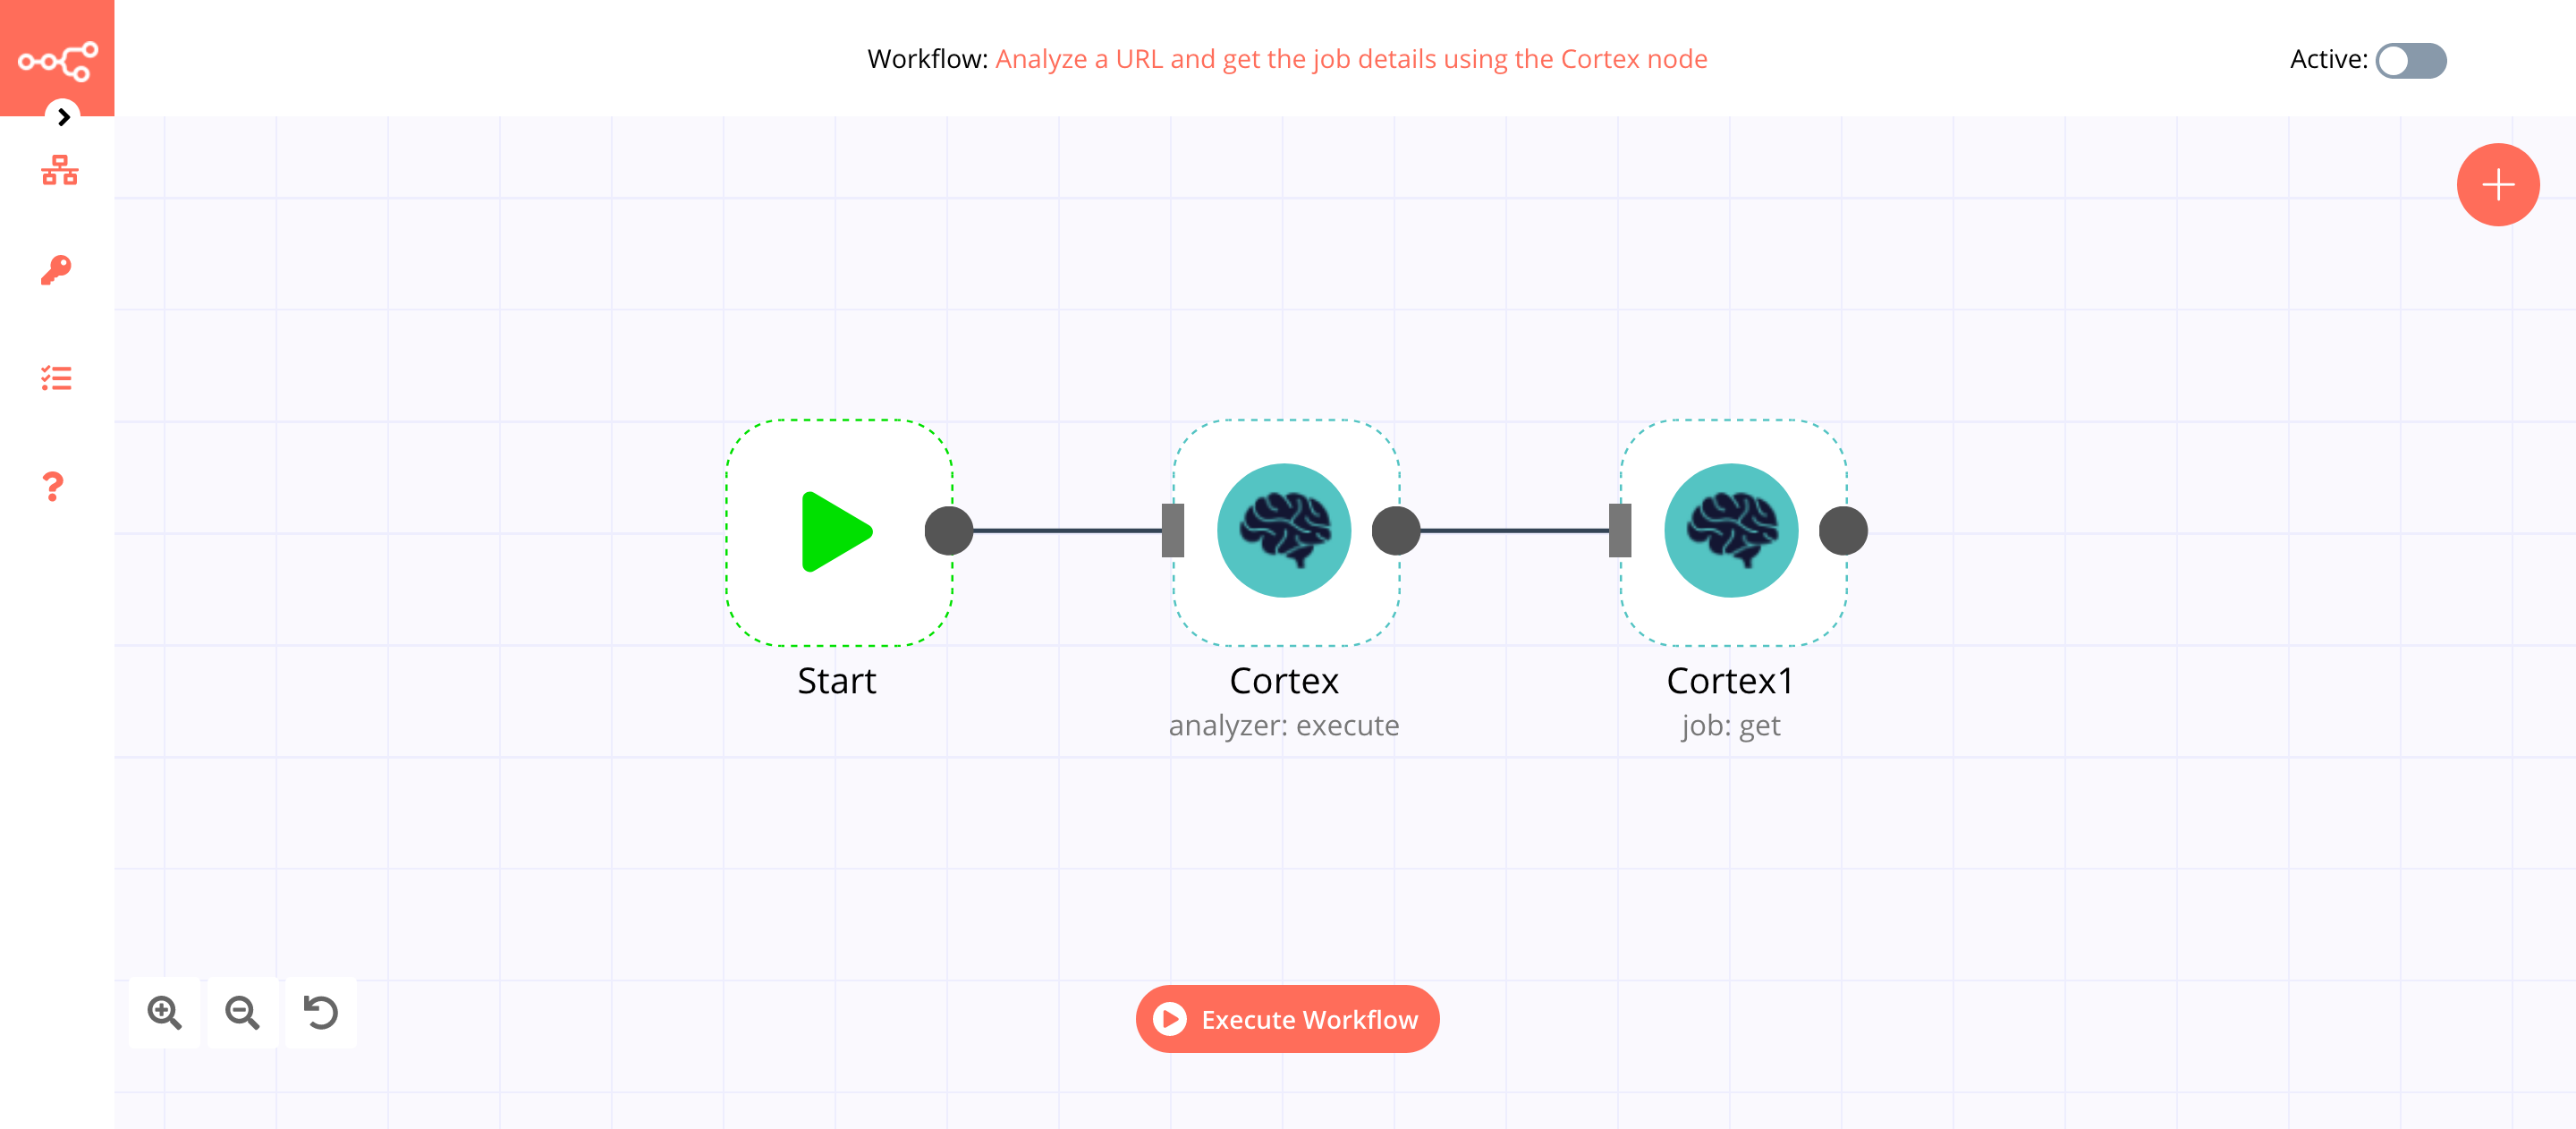 A workflow with the Cortex node